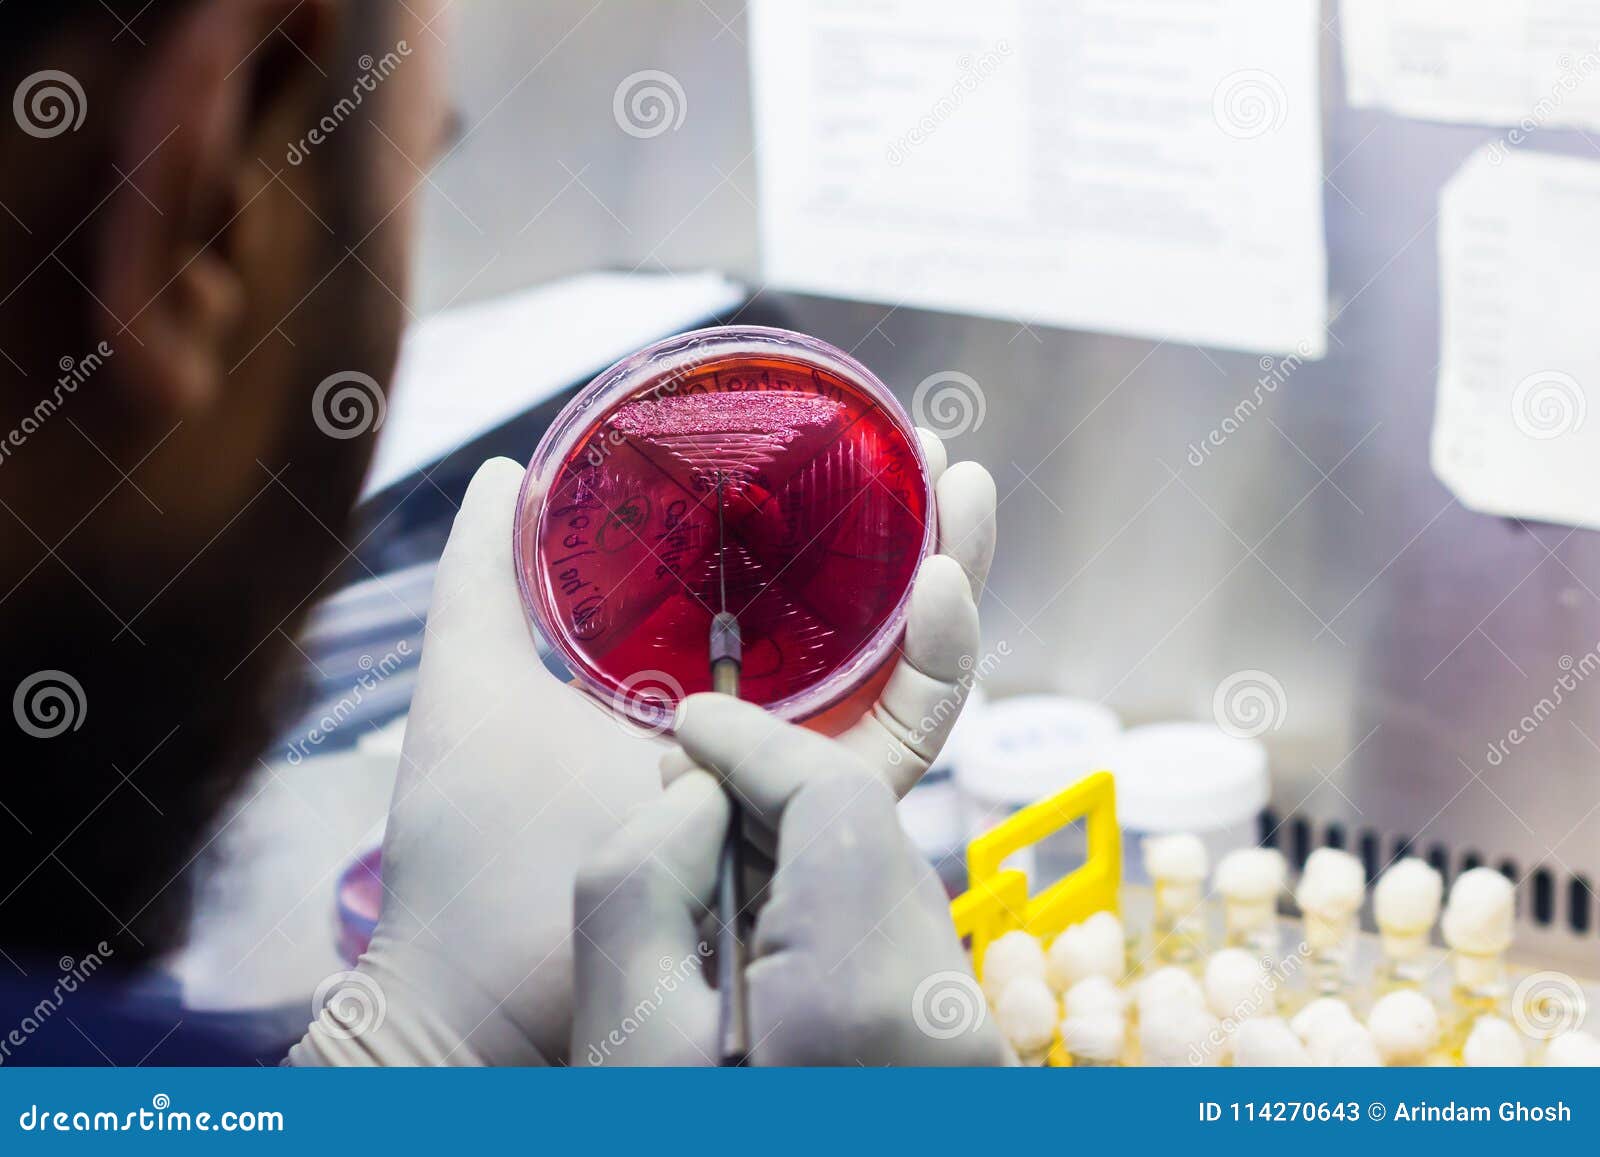 bacterial inoculation on a culture plate using inoculation loop by scientist inside fume hood in microbiology laboratory